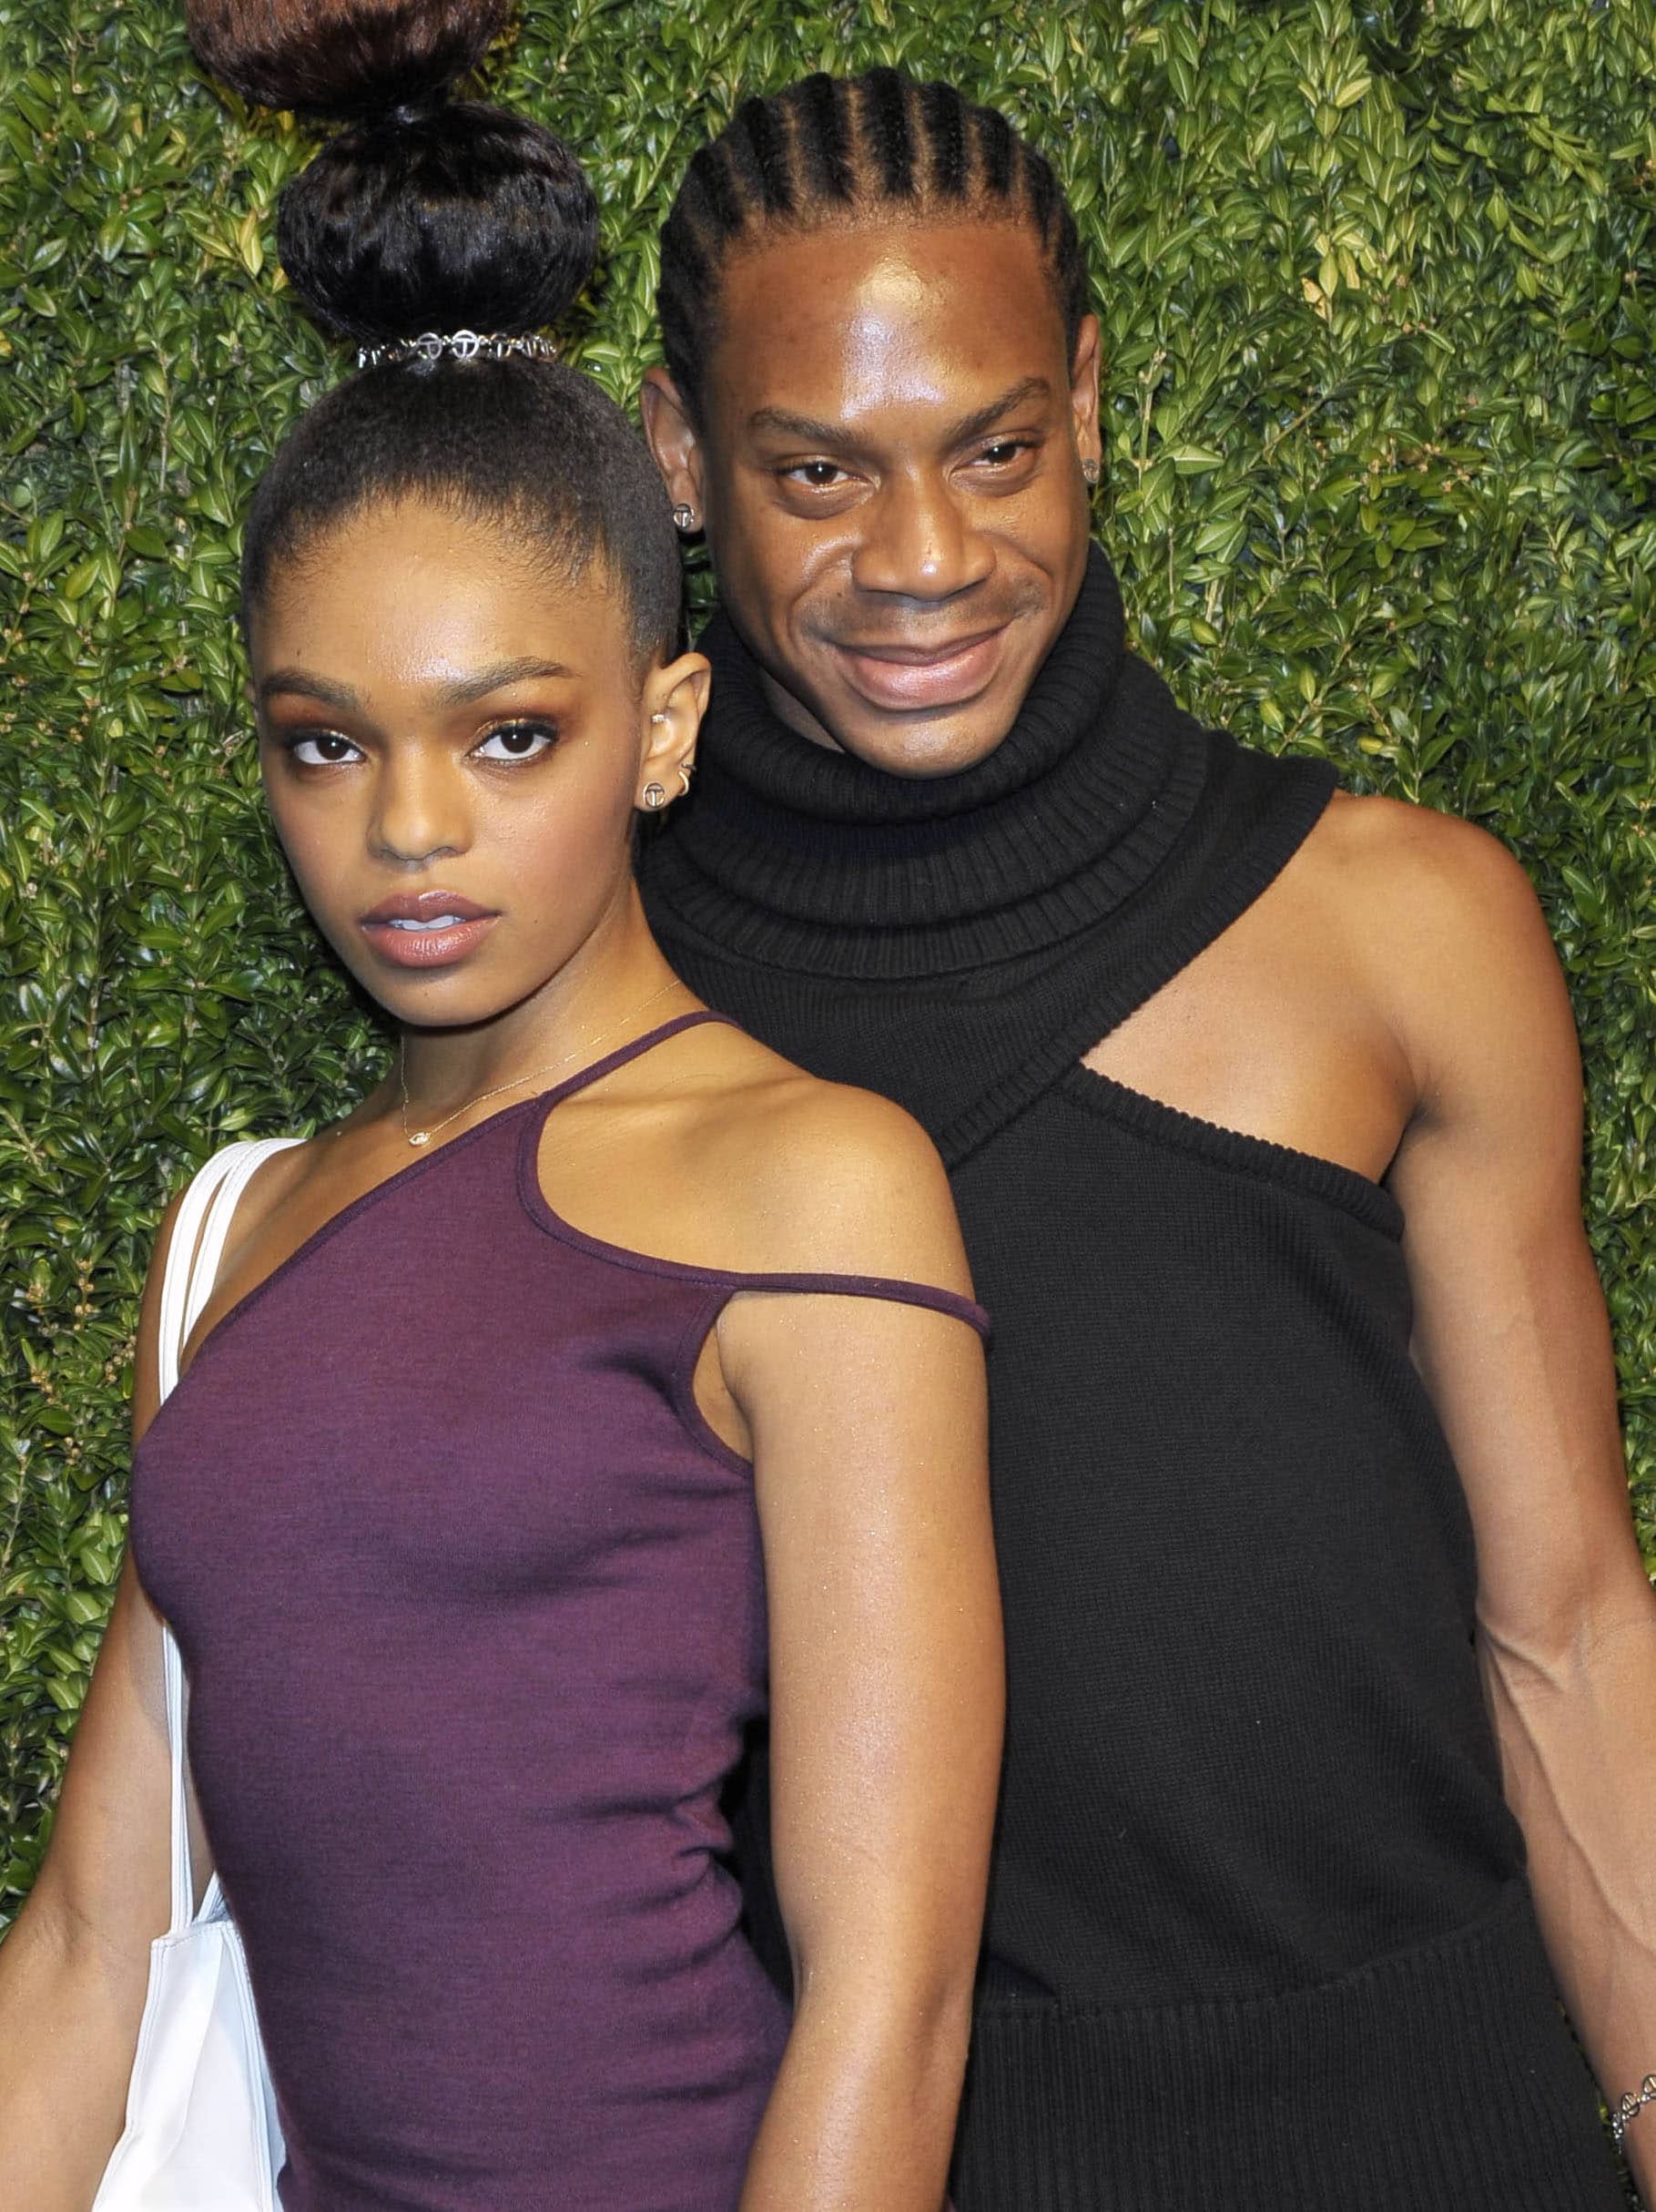 Model Selah Marley with Liberian-American fashion designer Telfar Clemens at the 14th Annual CFDA Fashion Fund Awards in 2017